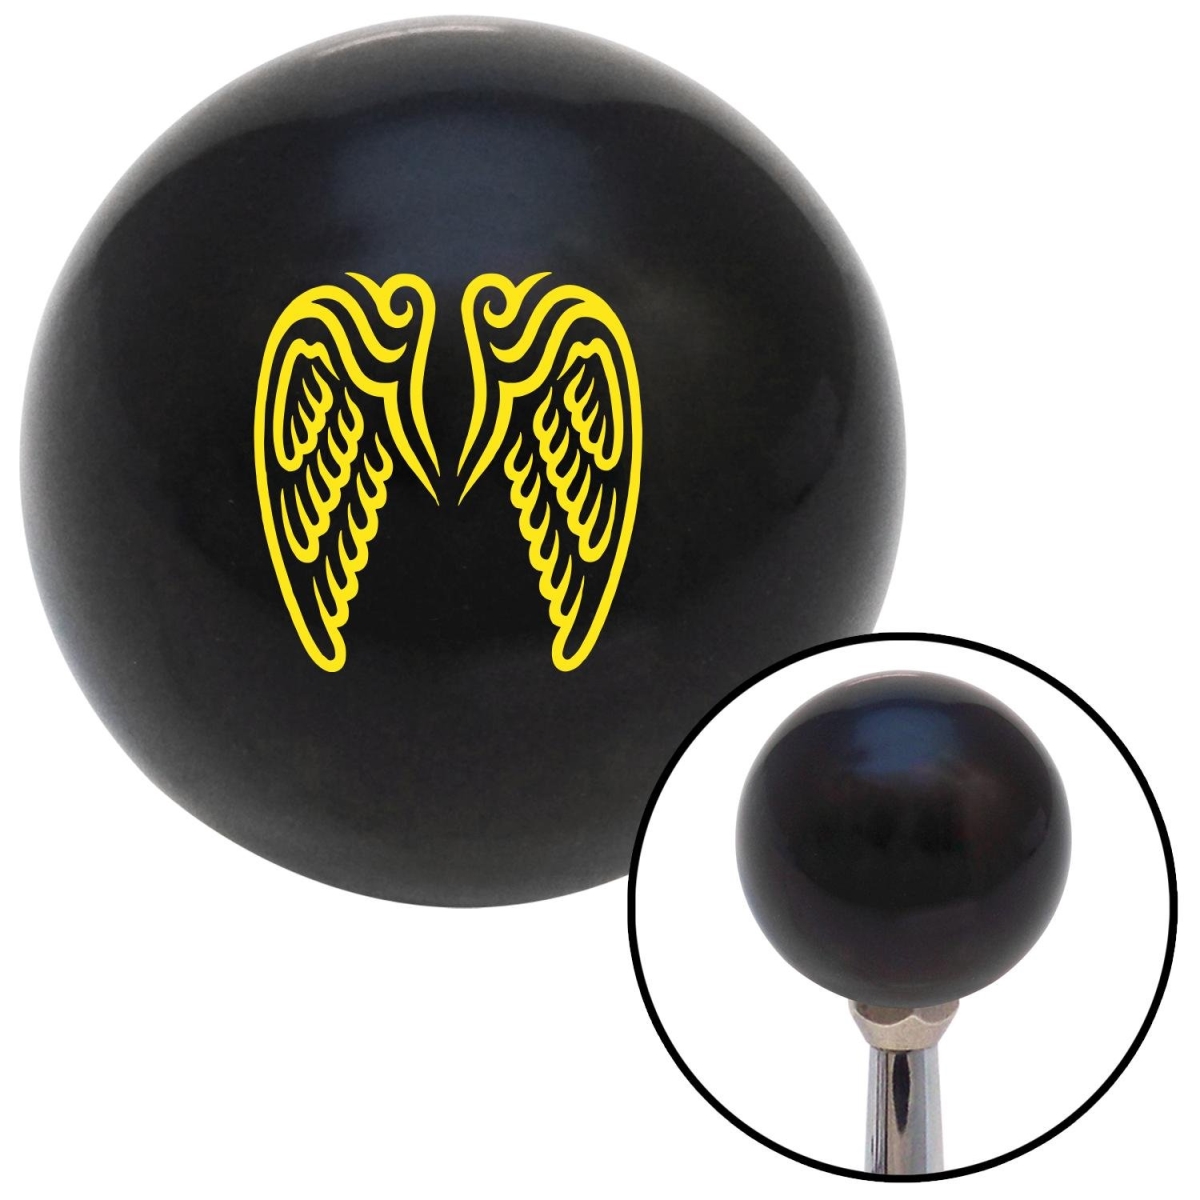 American Shifter 104573 Yellow Angel Wings Black Shift Knob with M16 x 1.5 Insert Shifter Auto Manual Brody -  American Shifter Company